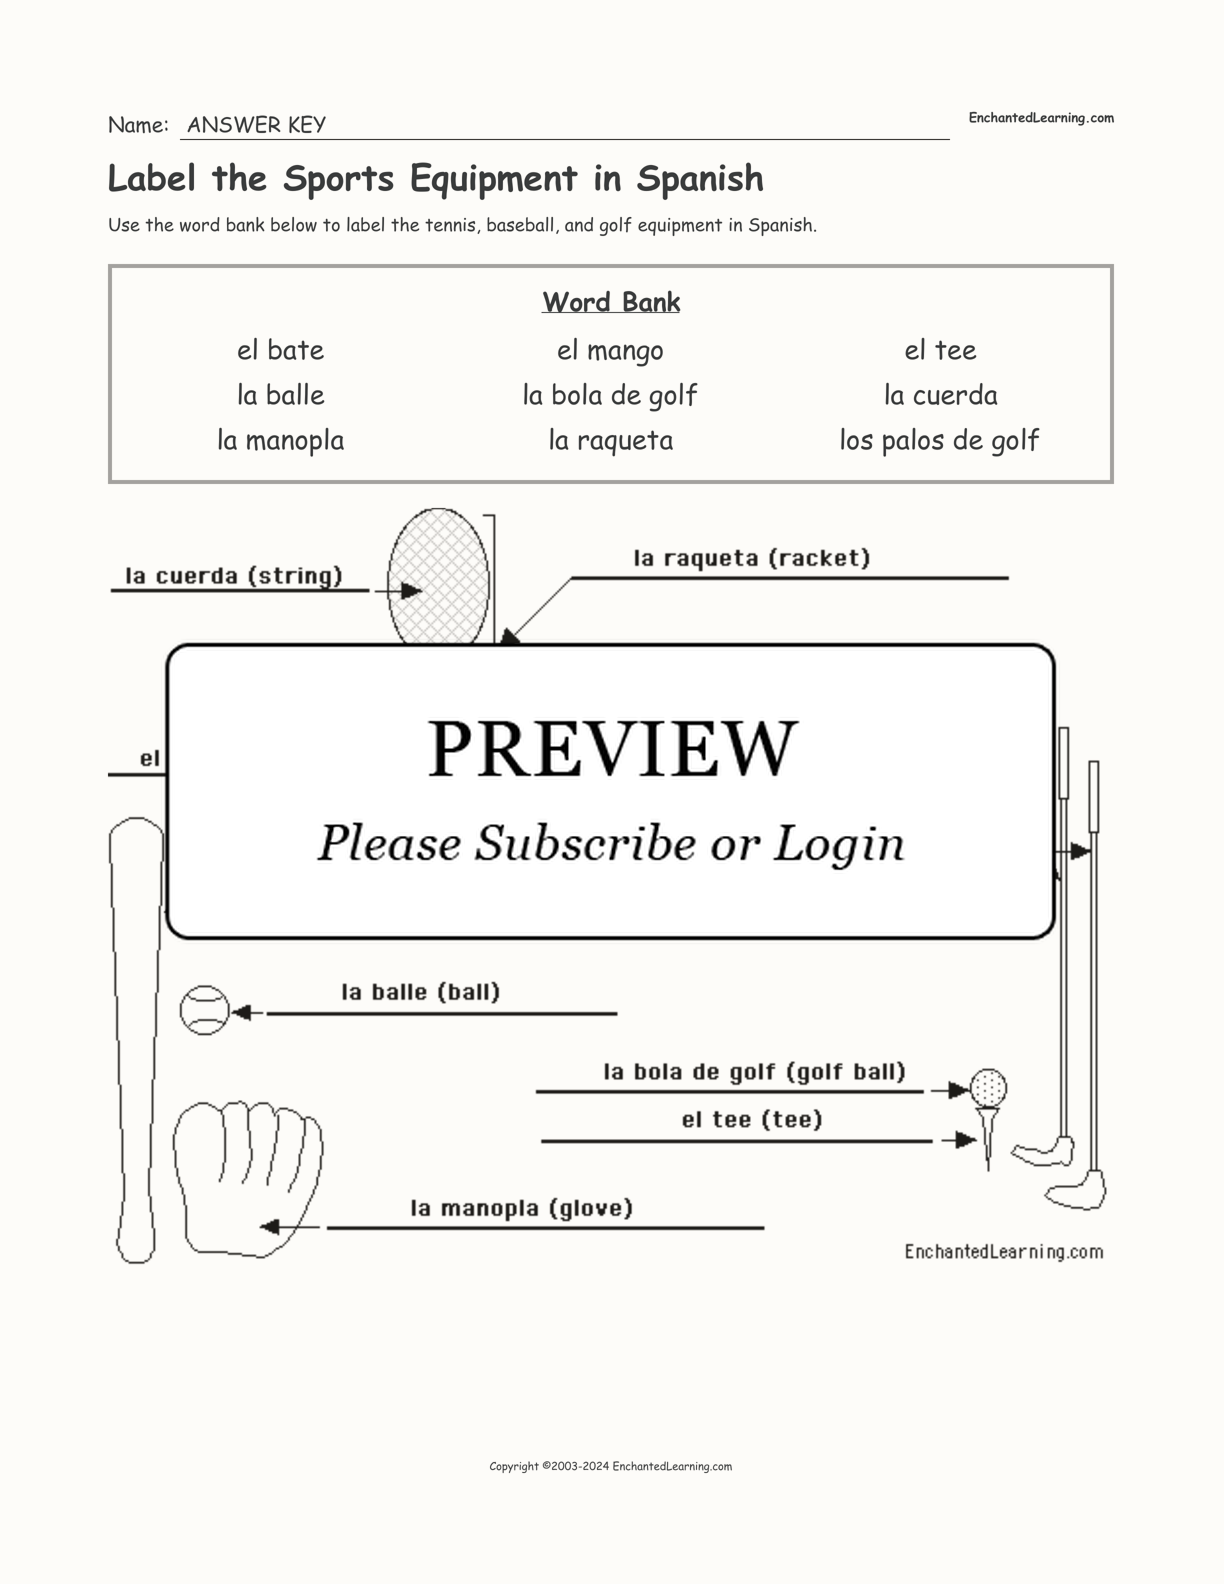 Label the Sports Equipment in Spanish interactive worksheet page 2